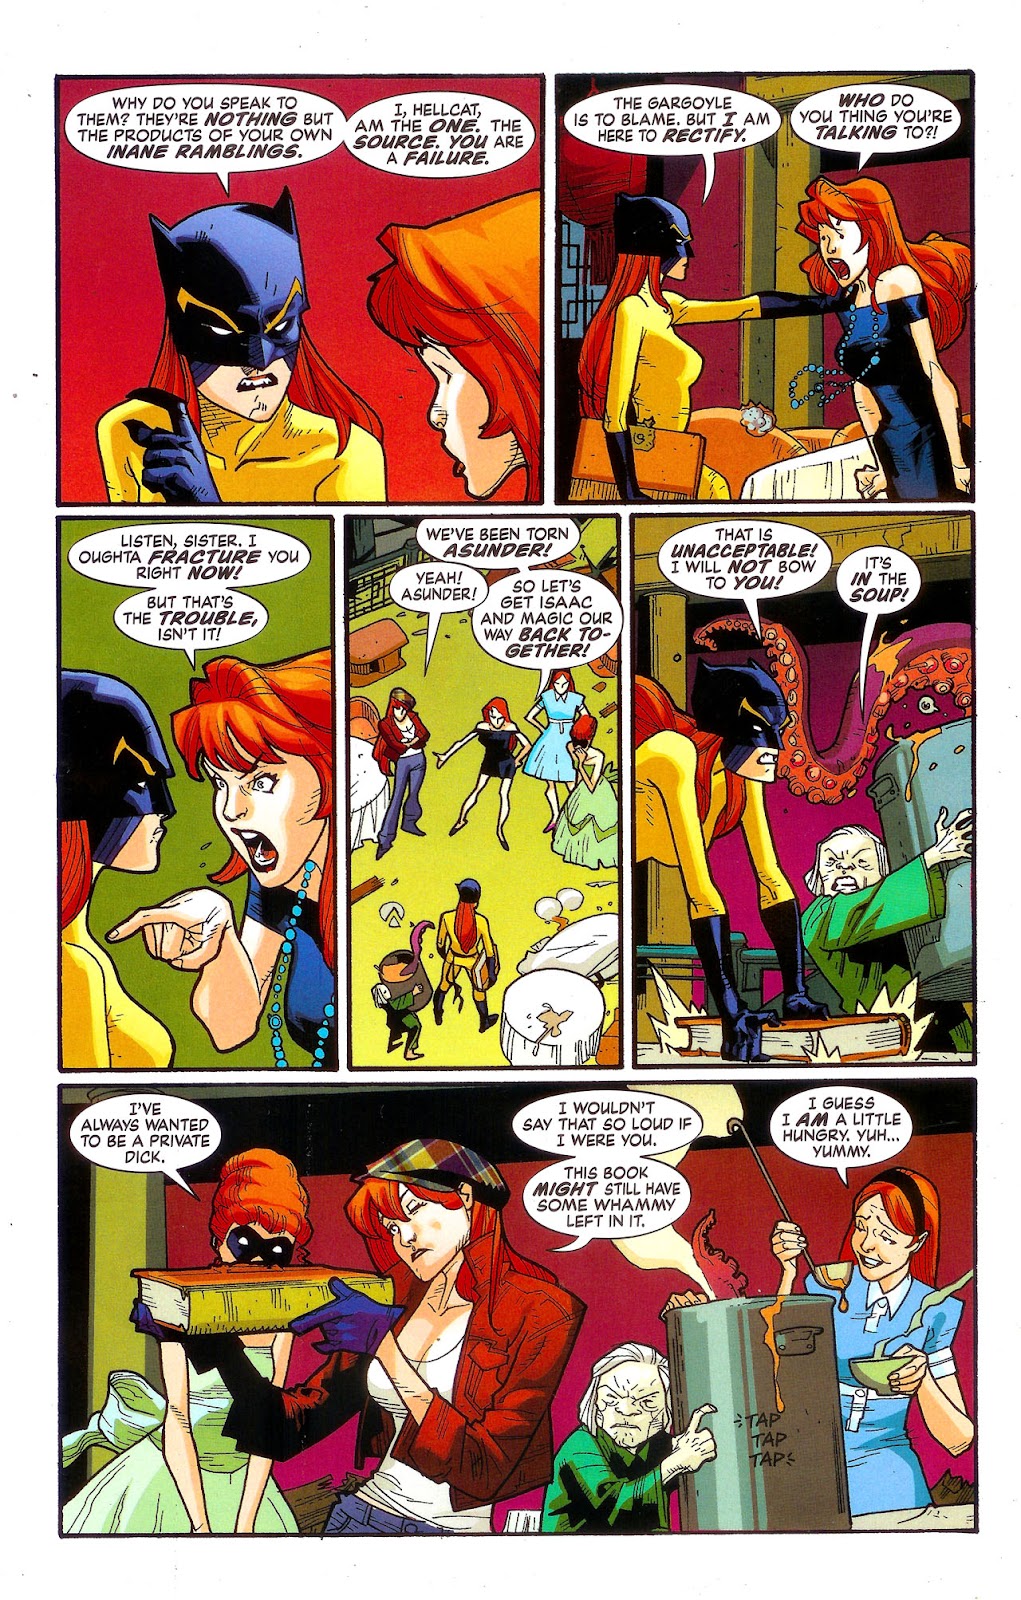 Marvel Comics Presents (2007) issue 4 - Page 13